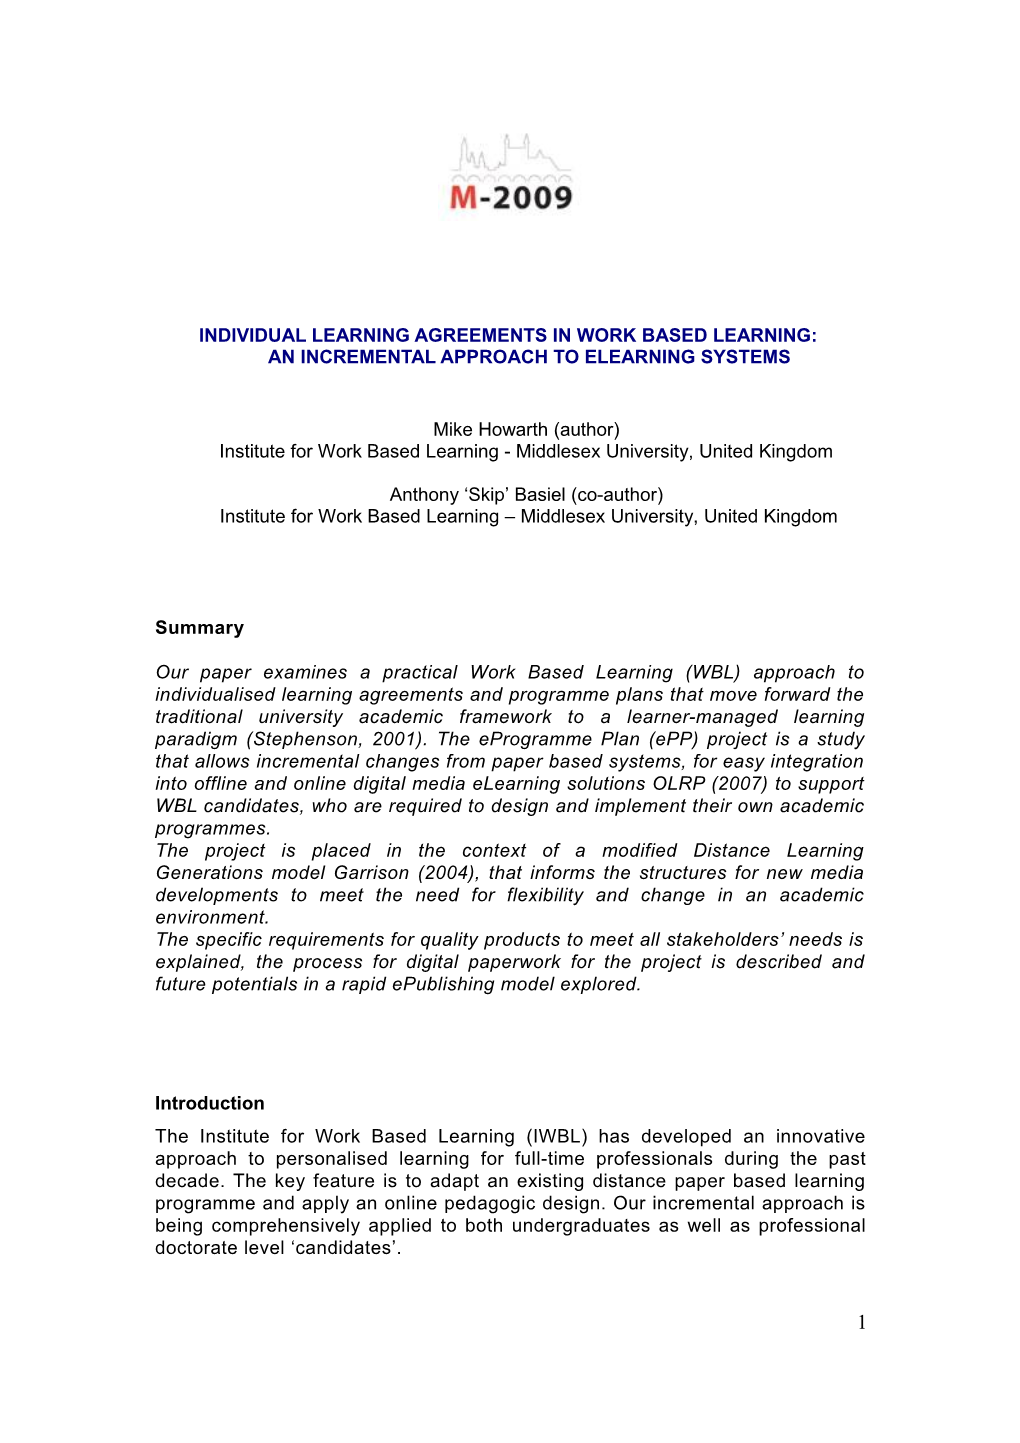 Individual Learning Agreements in Work Based Learning: an Incremental Approach to Elearning